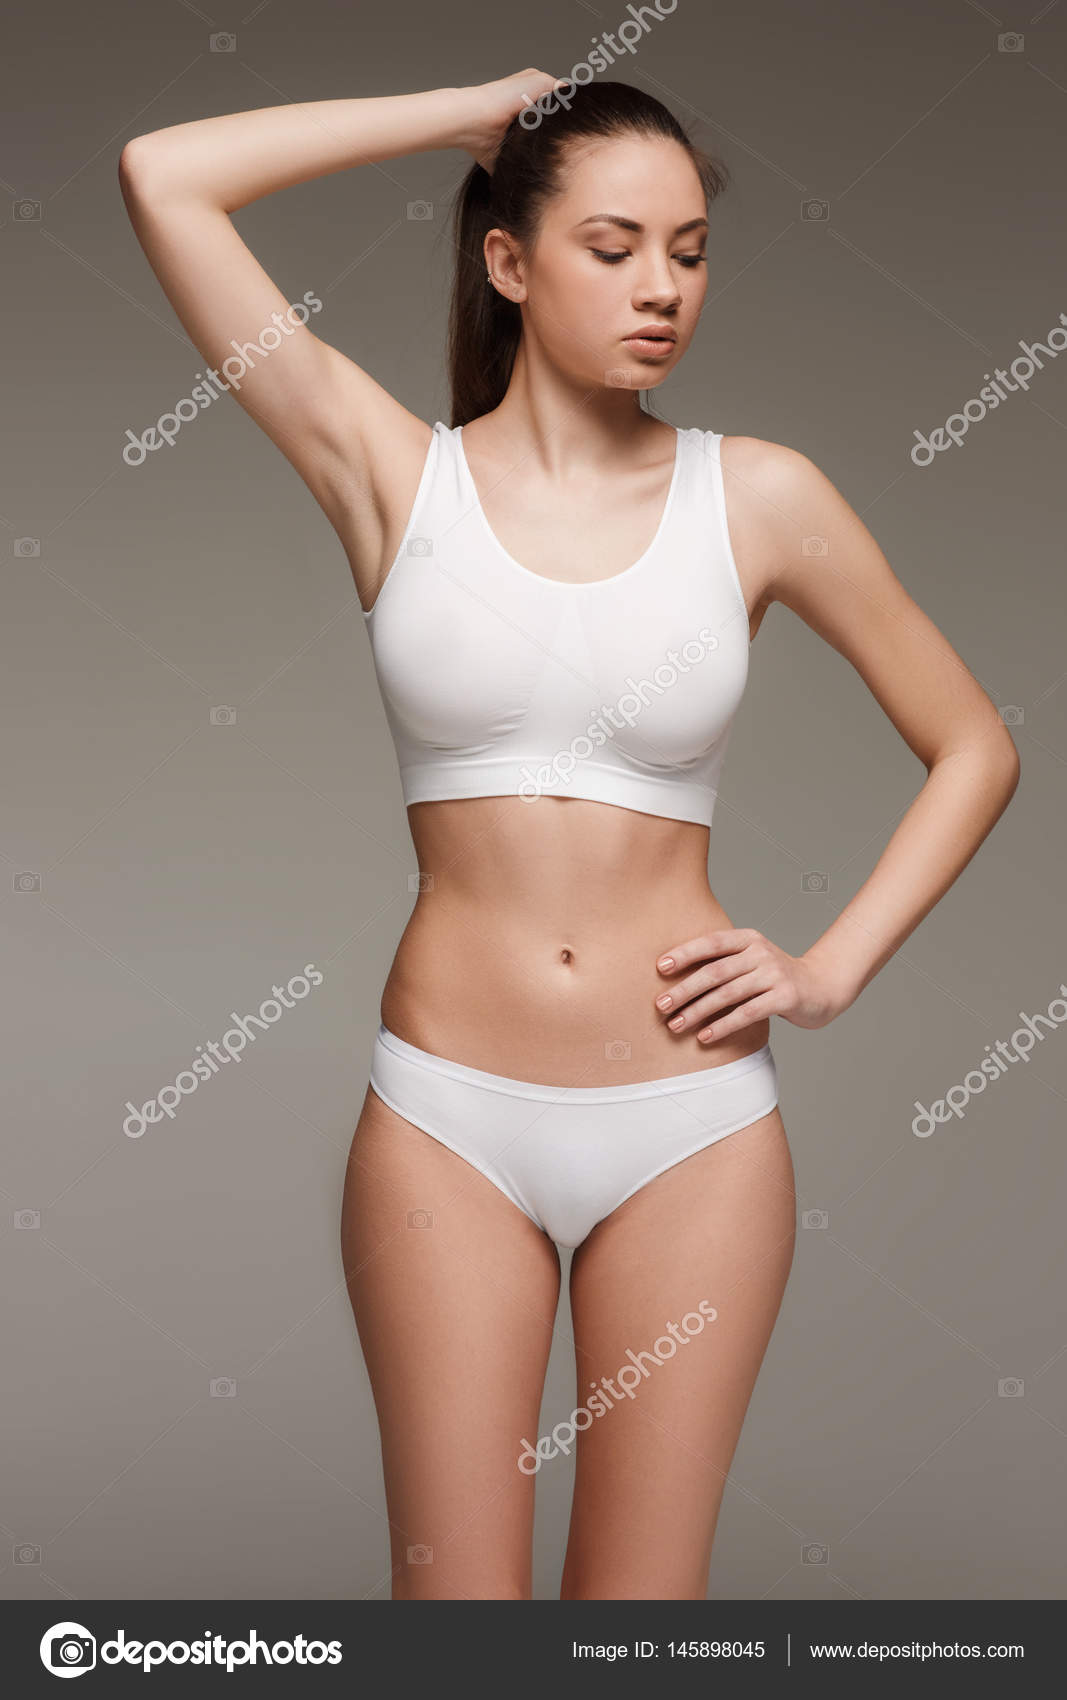 Premium Photo  Be healthy! attractive young woman in white bra